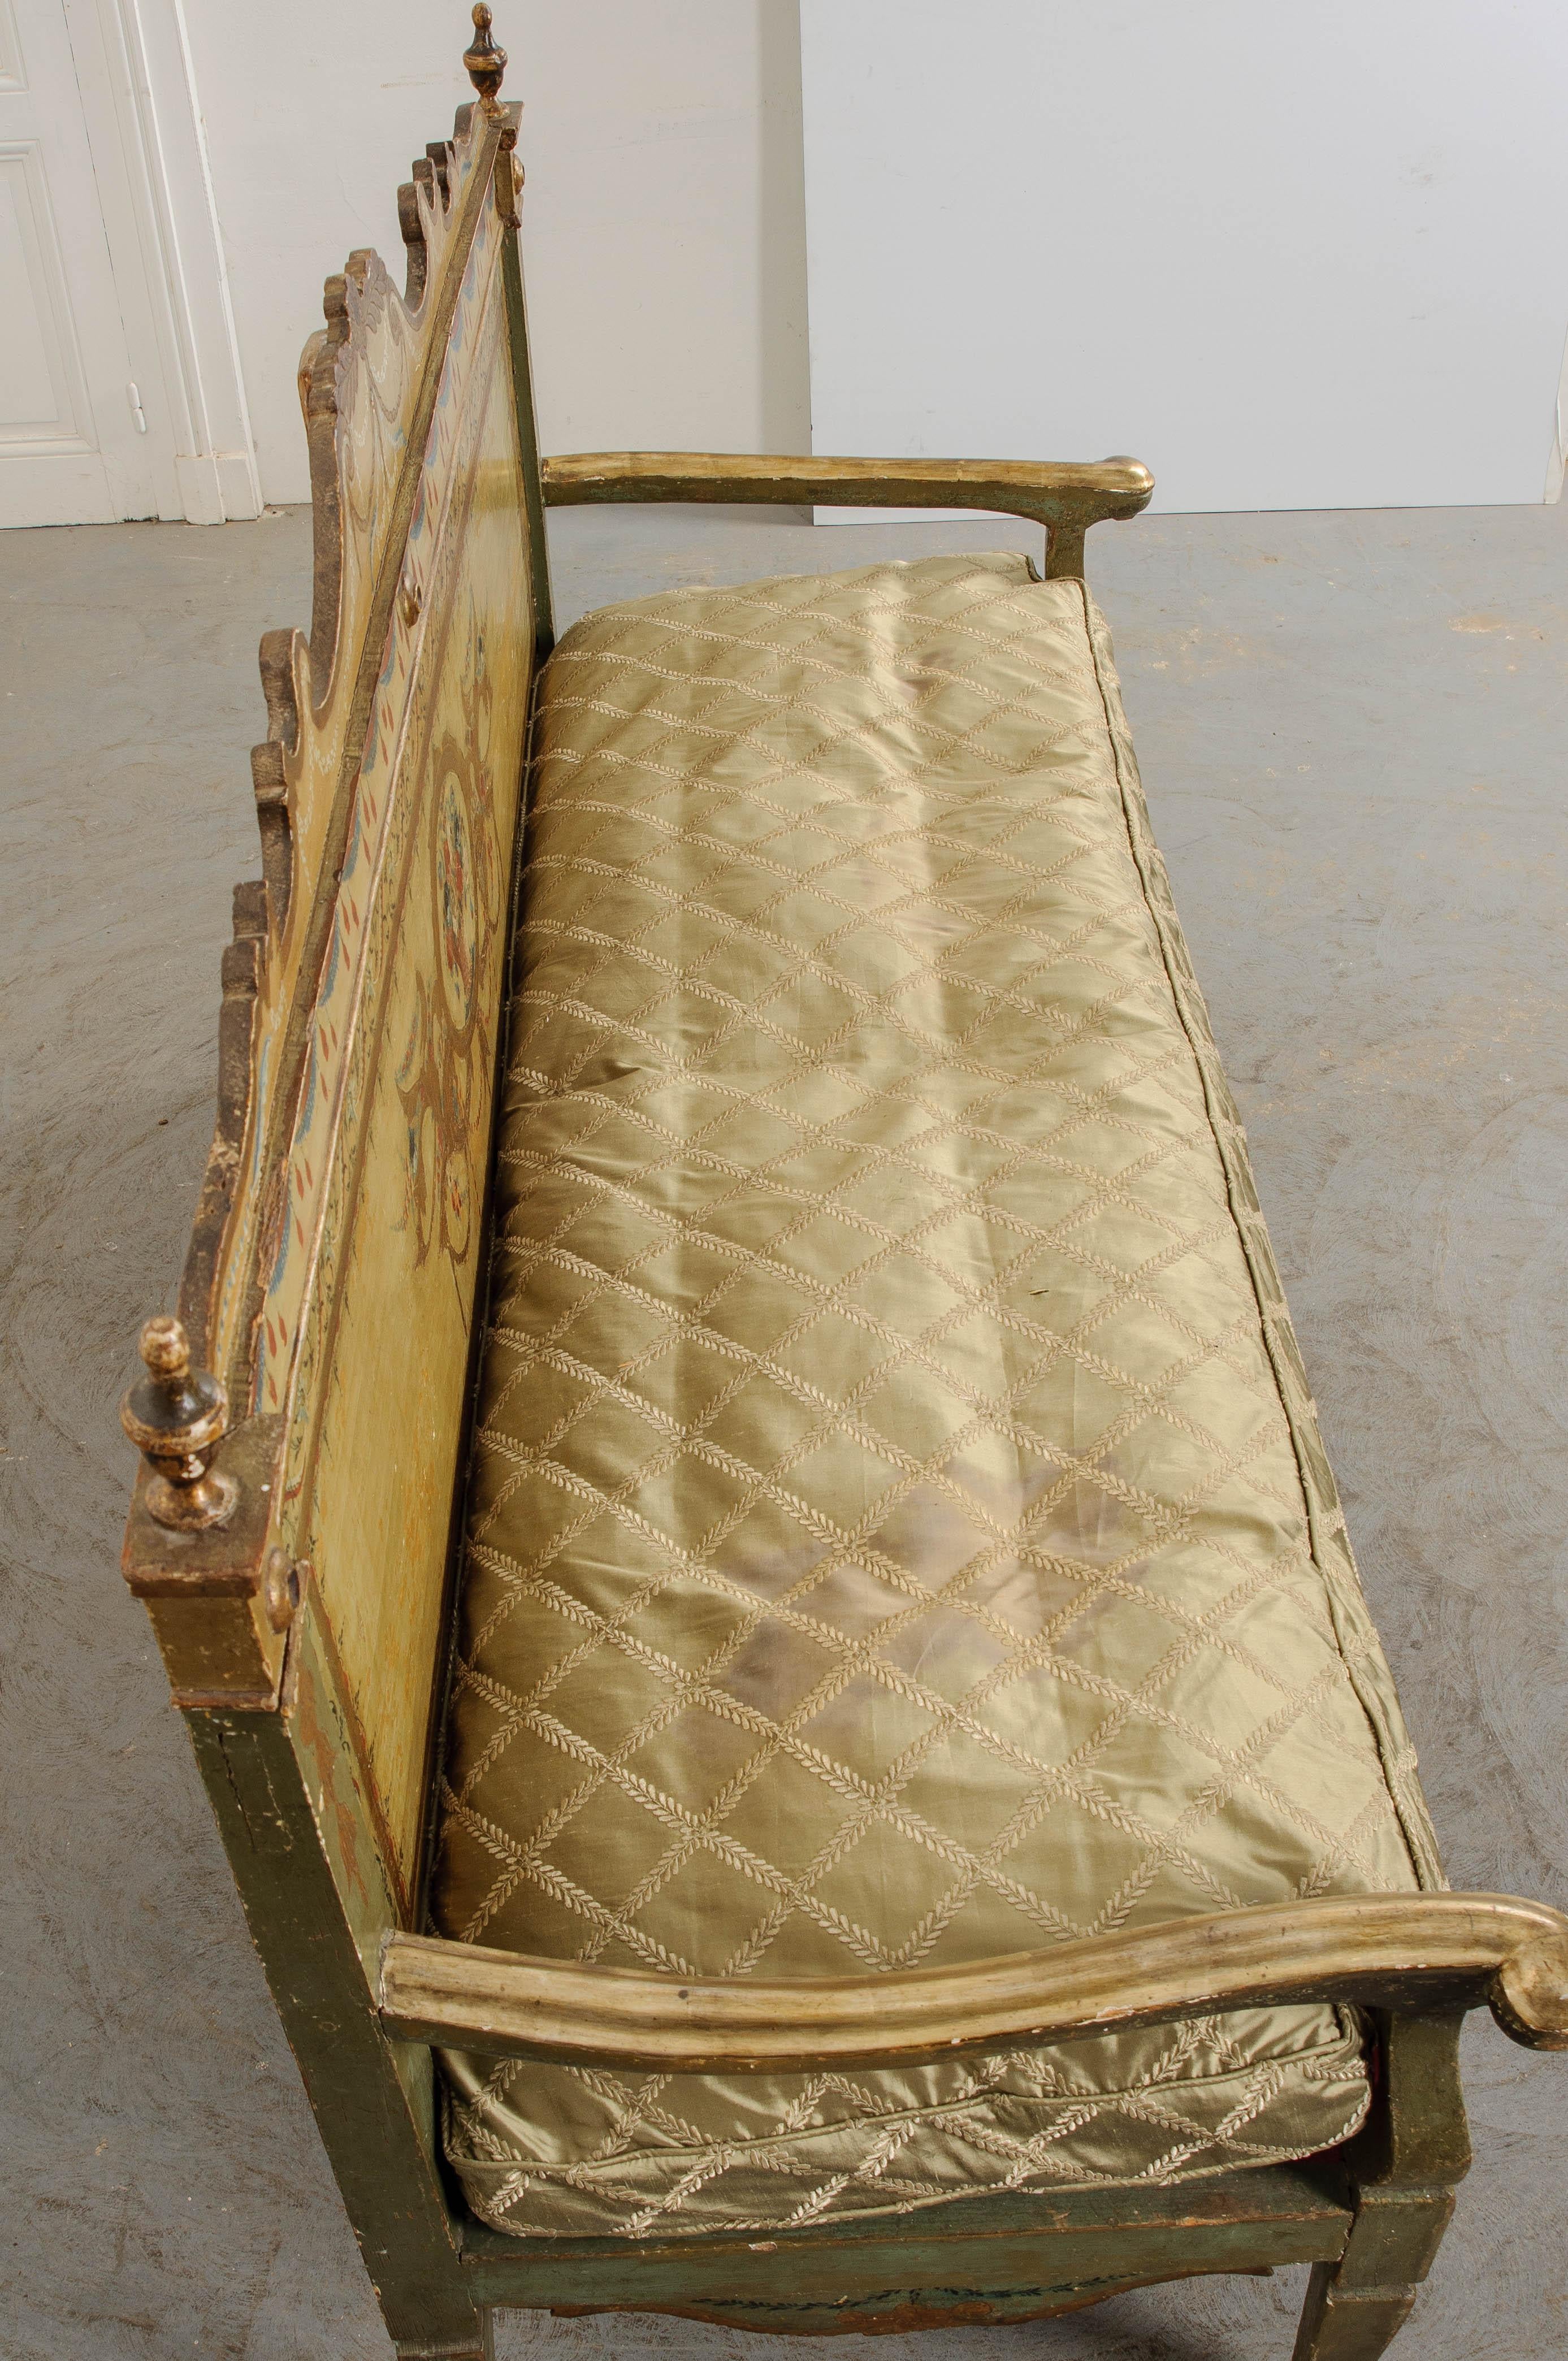 Masterfull artistic talent was employed to create this stunning Italian canape. The sofa’s back could be mistaken for a canvas, given the finely detailed artwork that graces its surface. A central cartouche encircles a sweet bouquet of potted